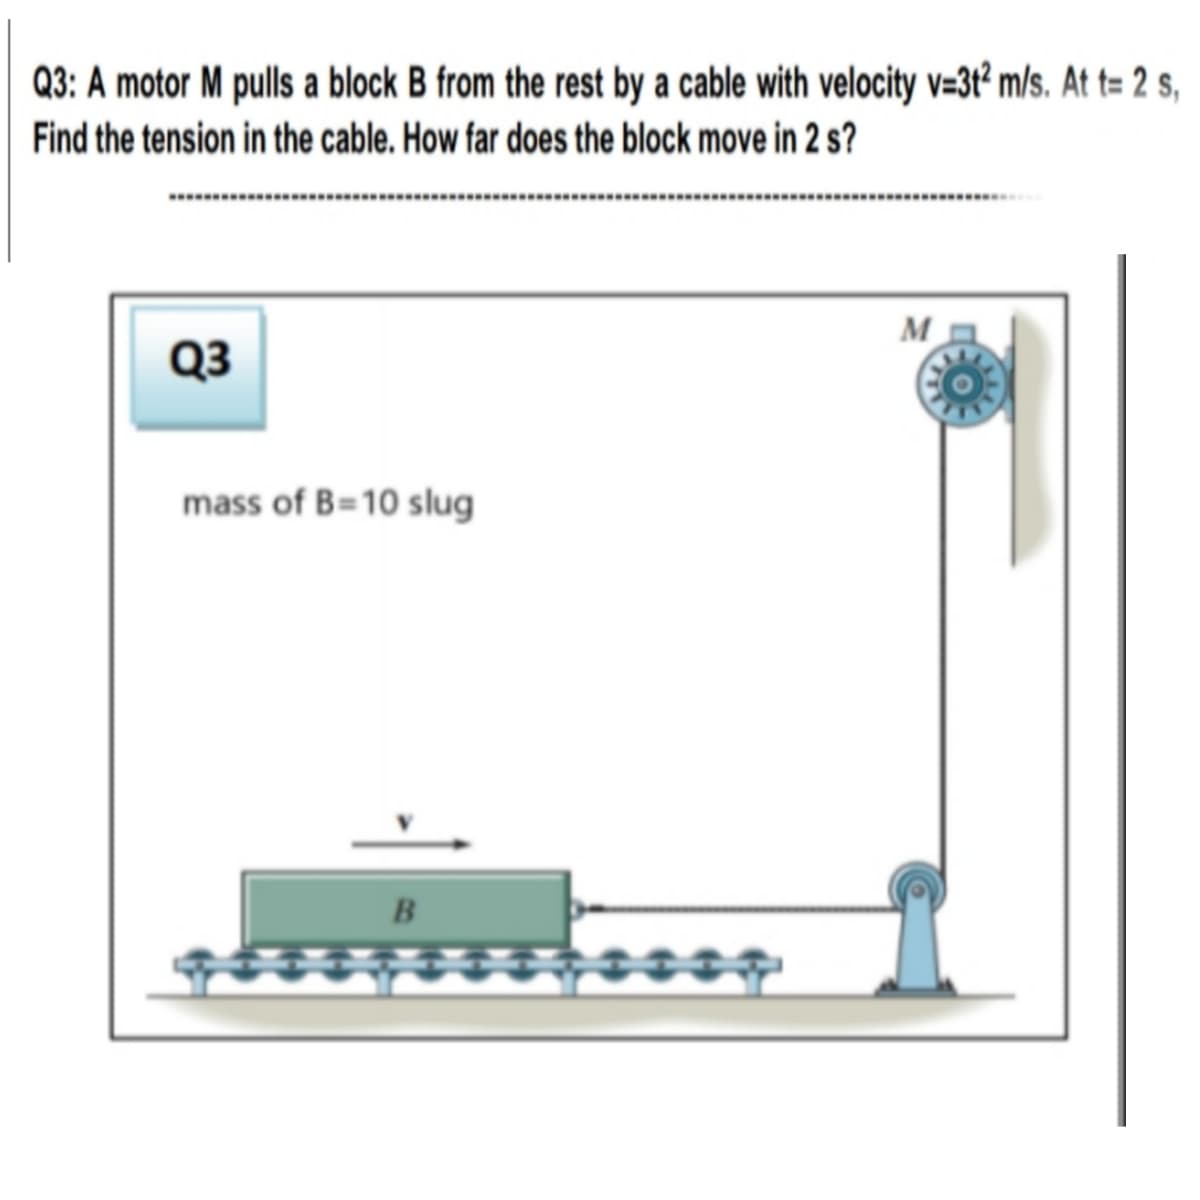 Q3: A motor M pulls a block B from the rest by a cable with velocity v=3t² m/s. At t= 2 s,
Find the tension in the cable. How far does the block move in 2 s?
M
Q3
mass of B=10 slug
